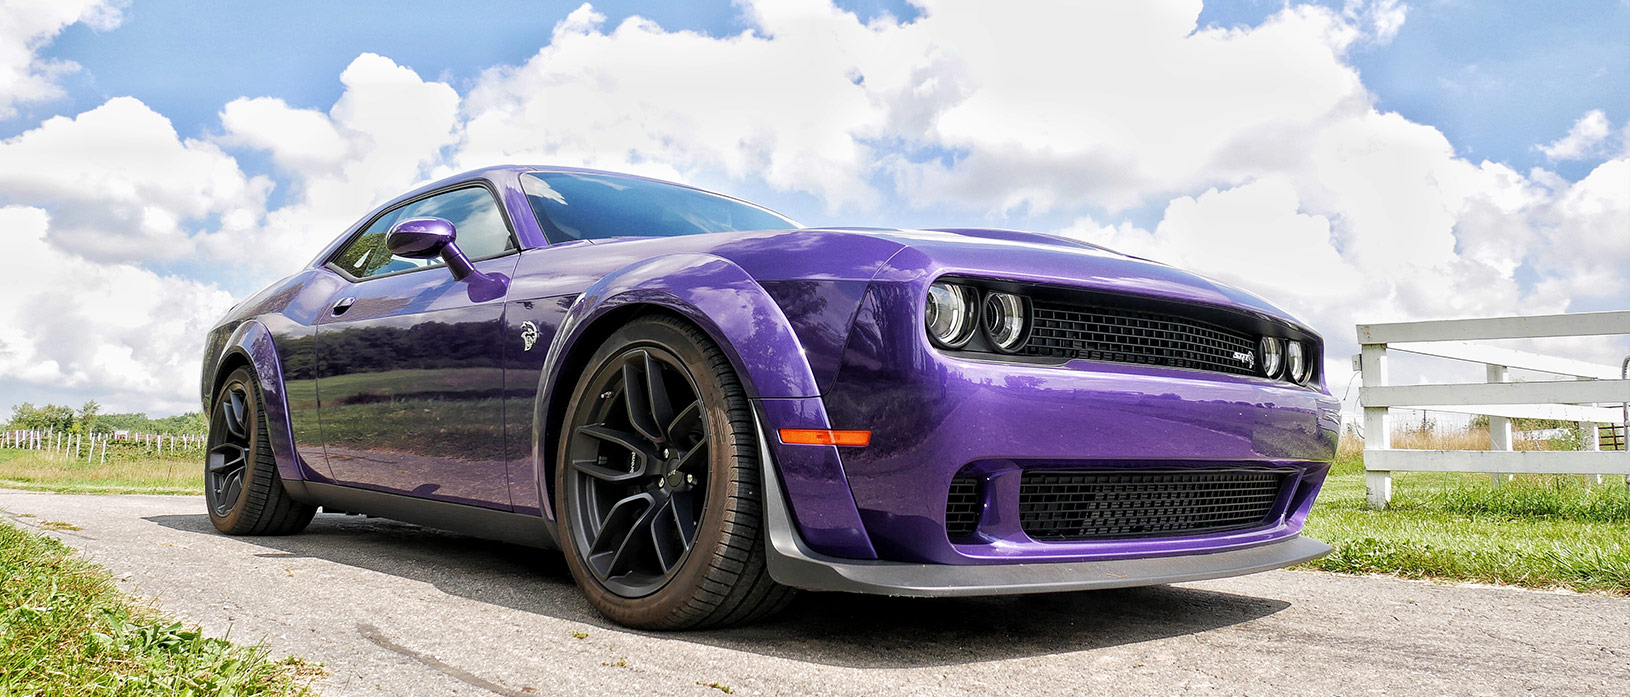 Plum Crazy Challenger Hellcat parked in the country